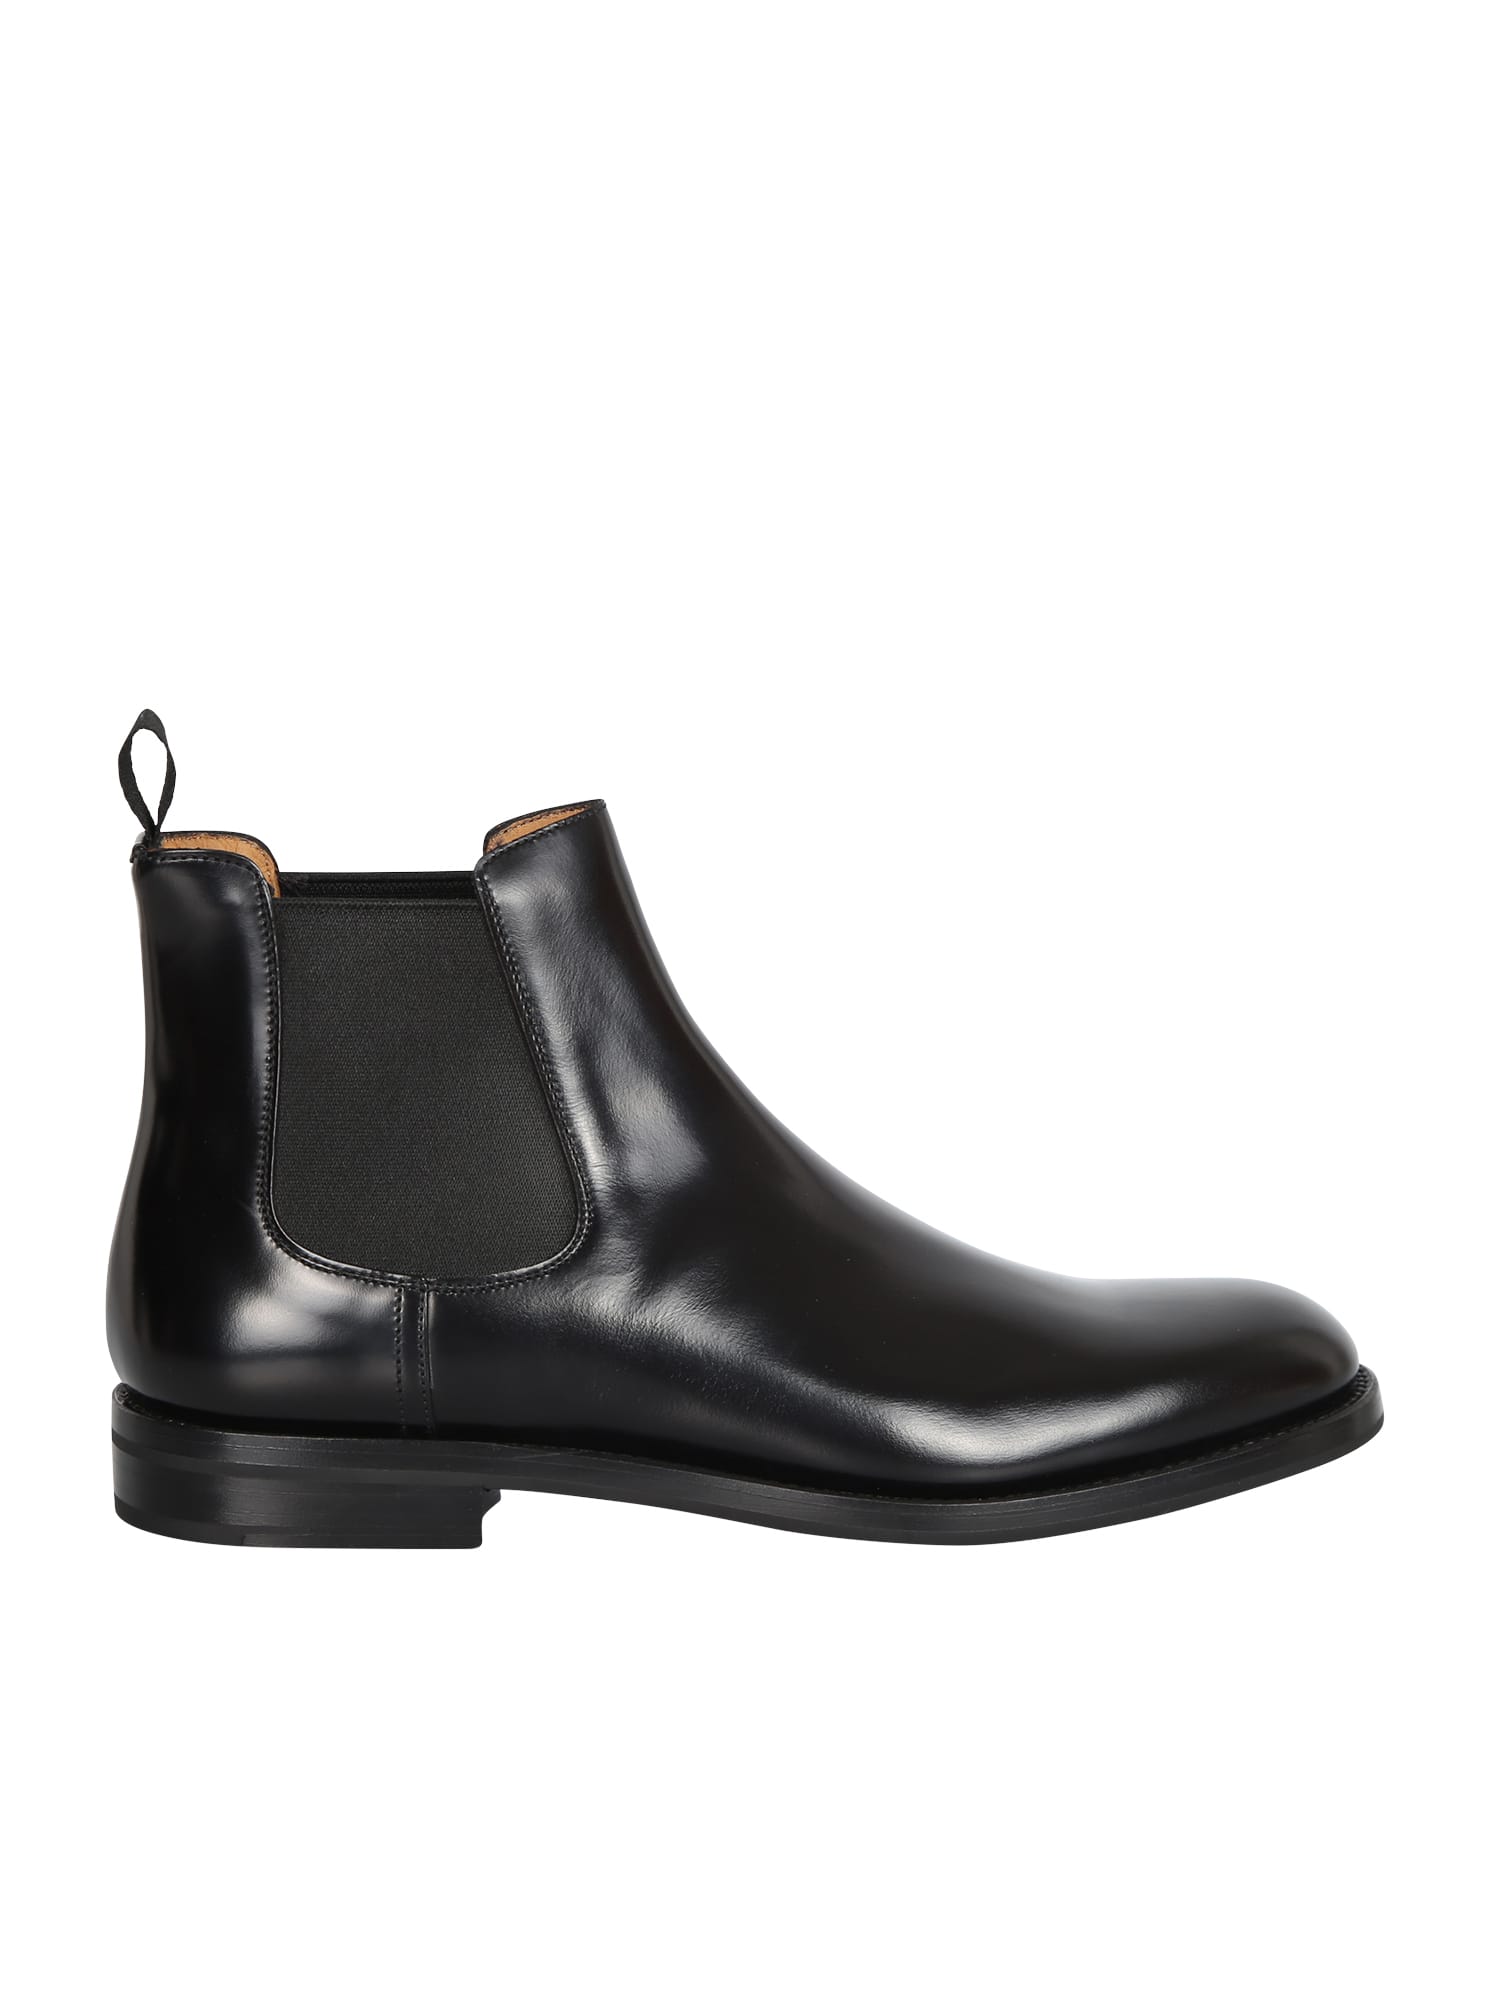 Churchs Monmouth Ankle Boots